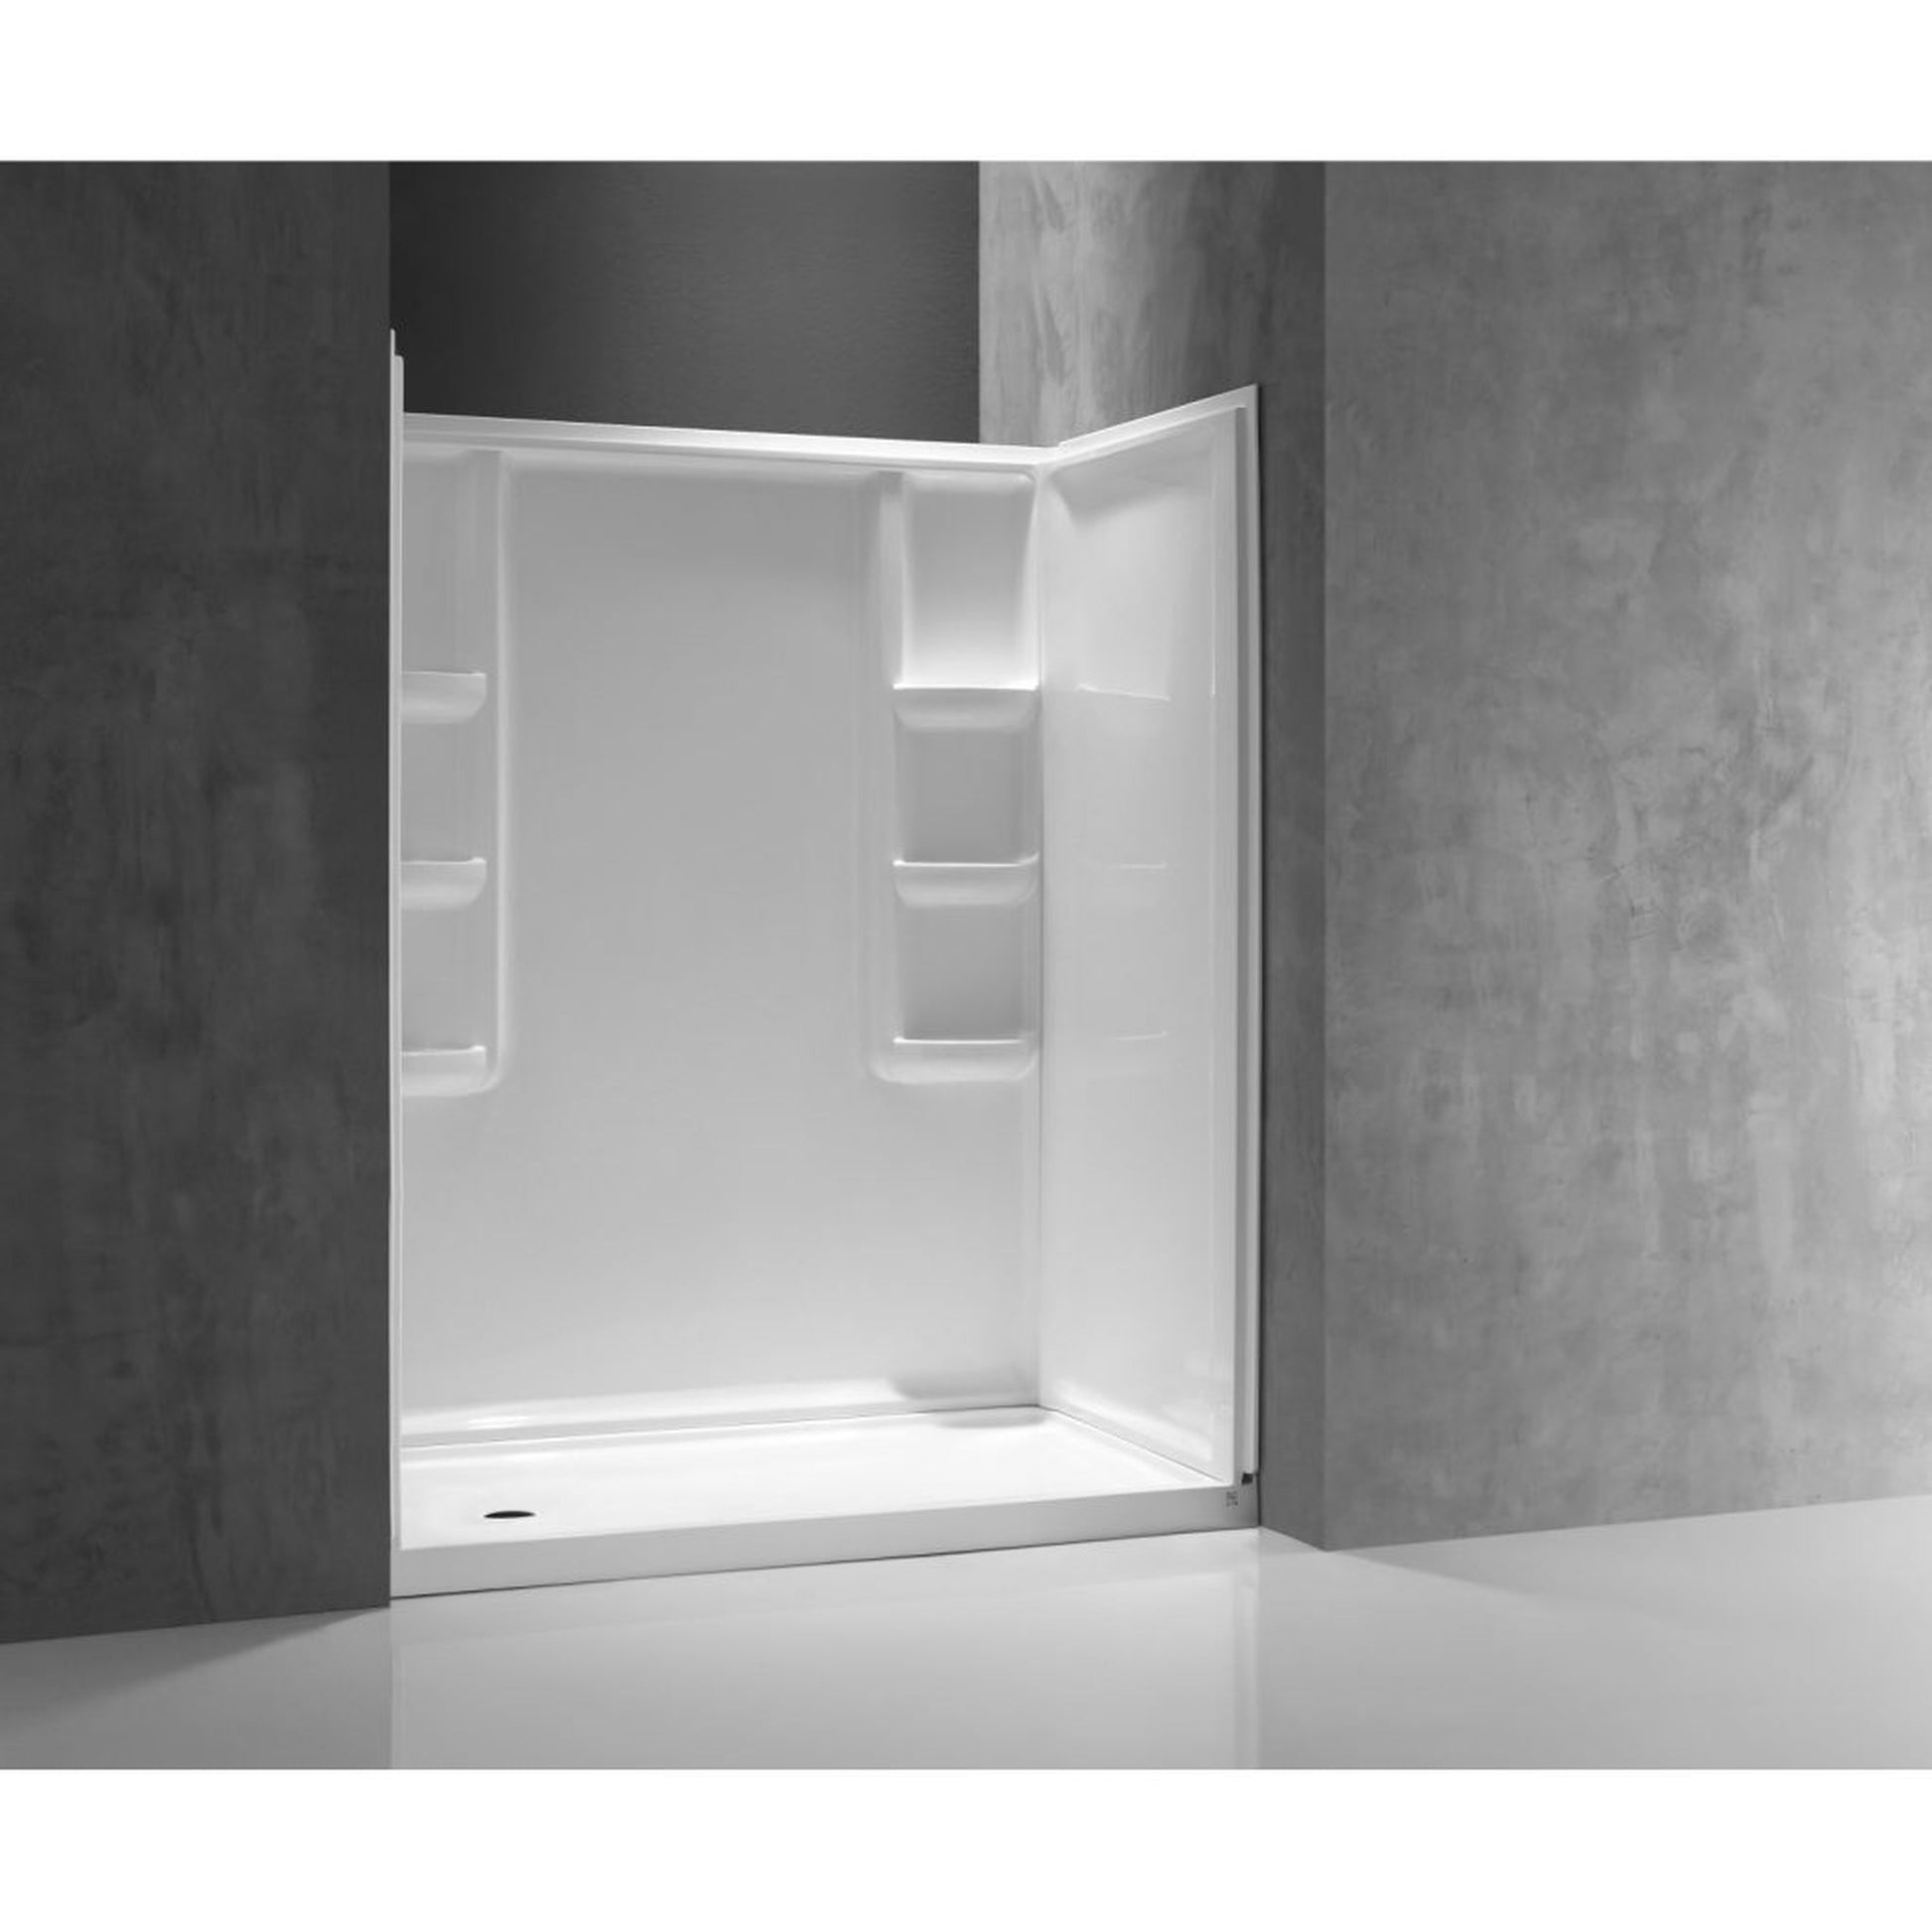 ANZZI Vasu Series 60" x 36" x 74" White Acrylic Alcove Three Piece Shower Wall System With 6 Built-in Shelves